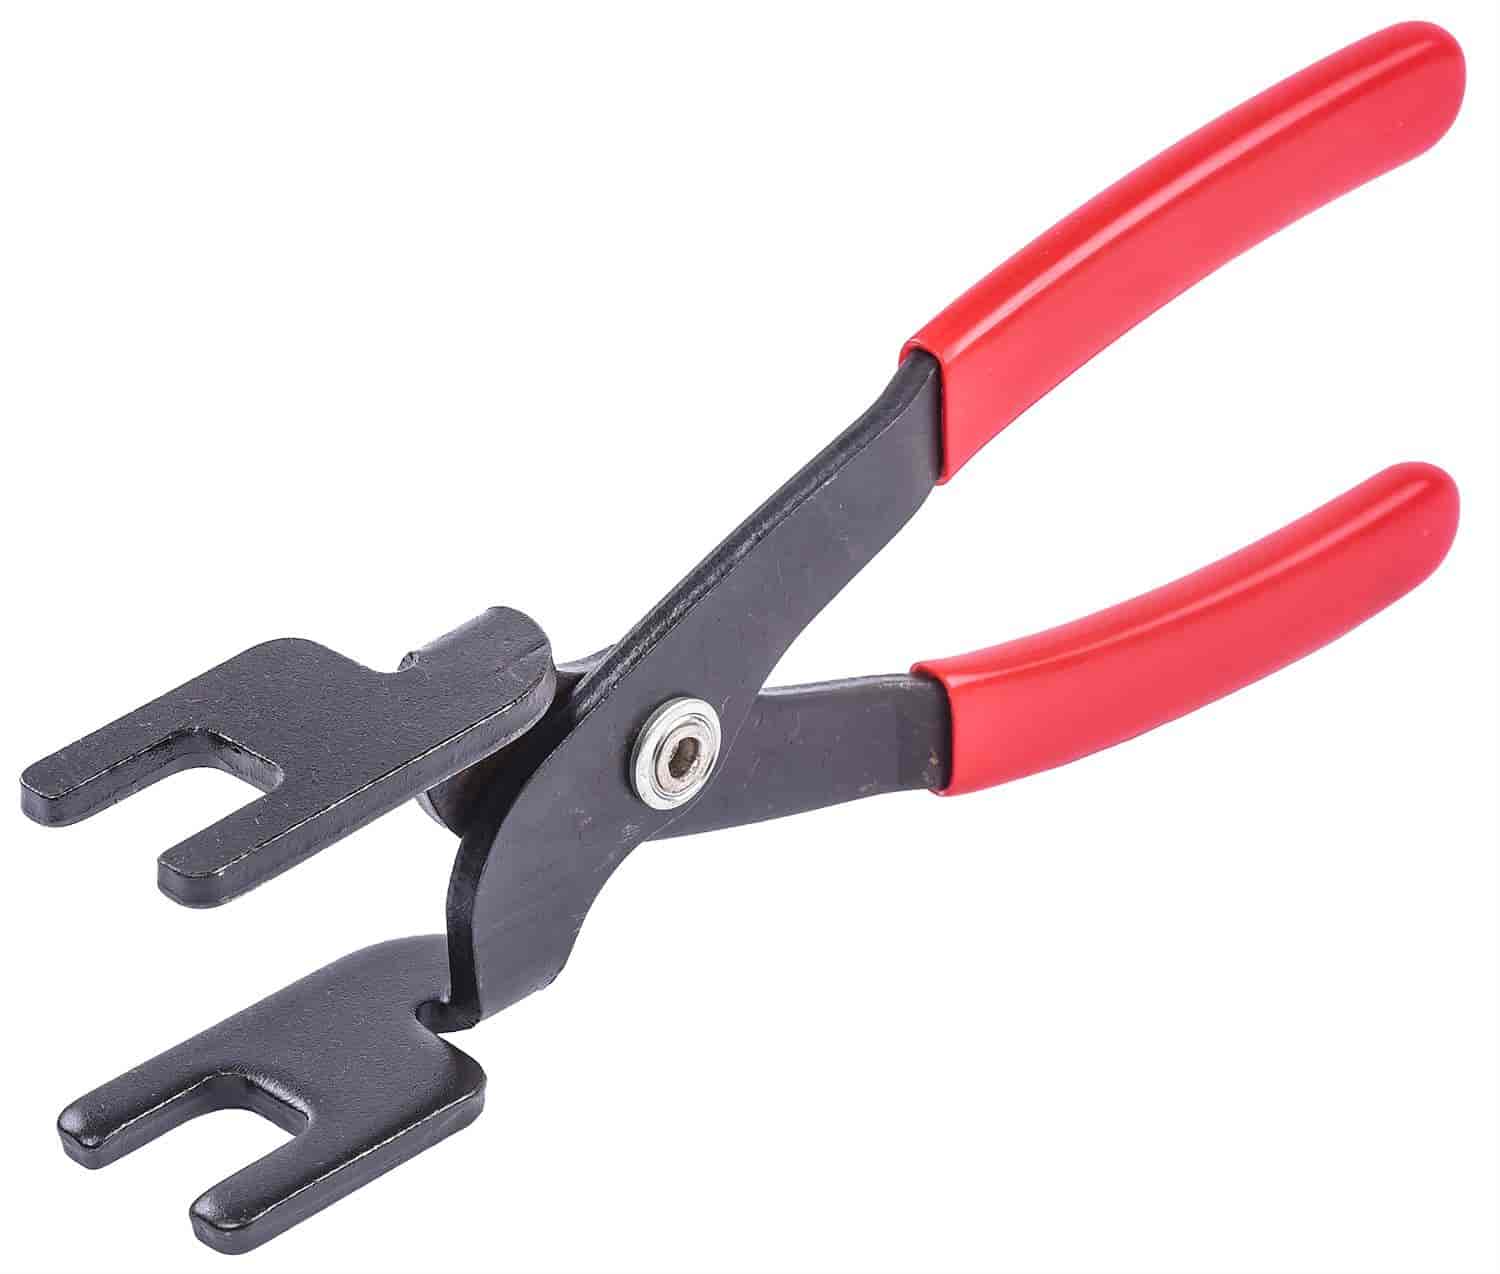 Fuel and A/C Disconnect Pliers